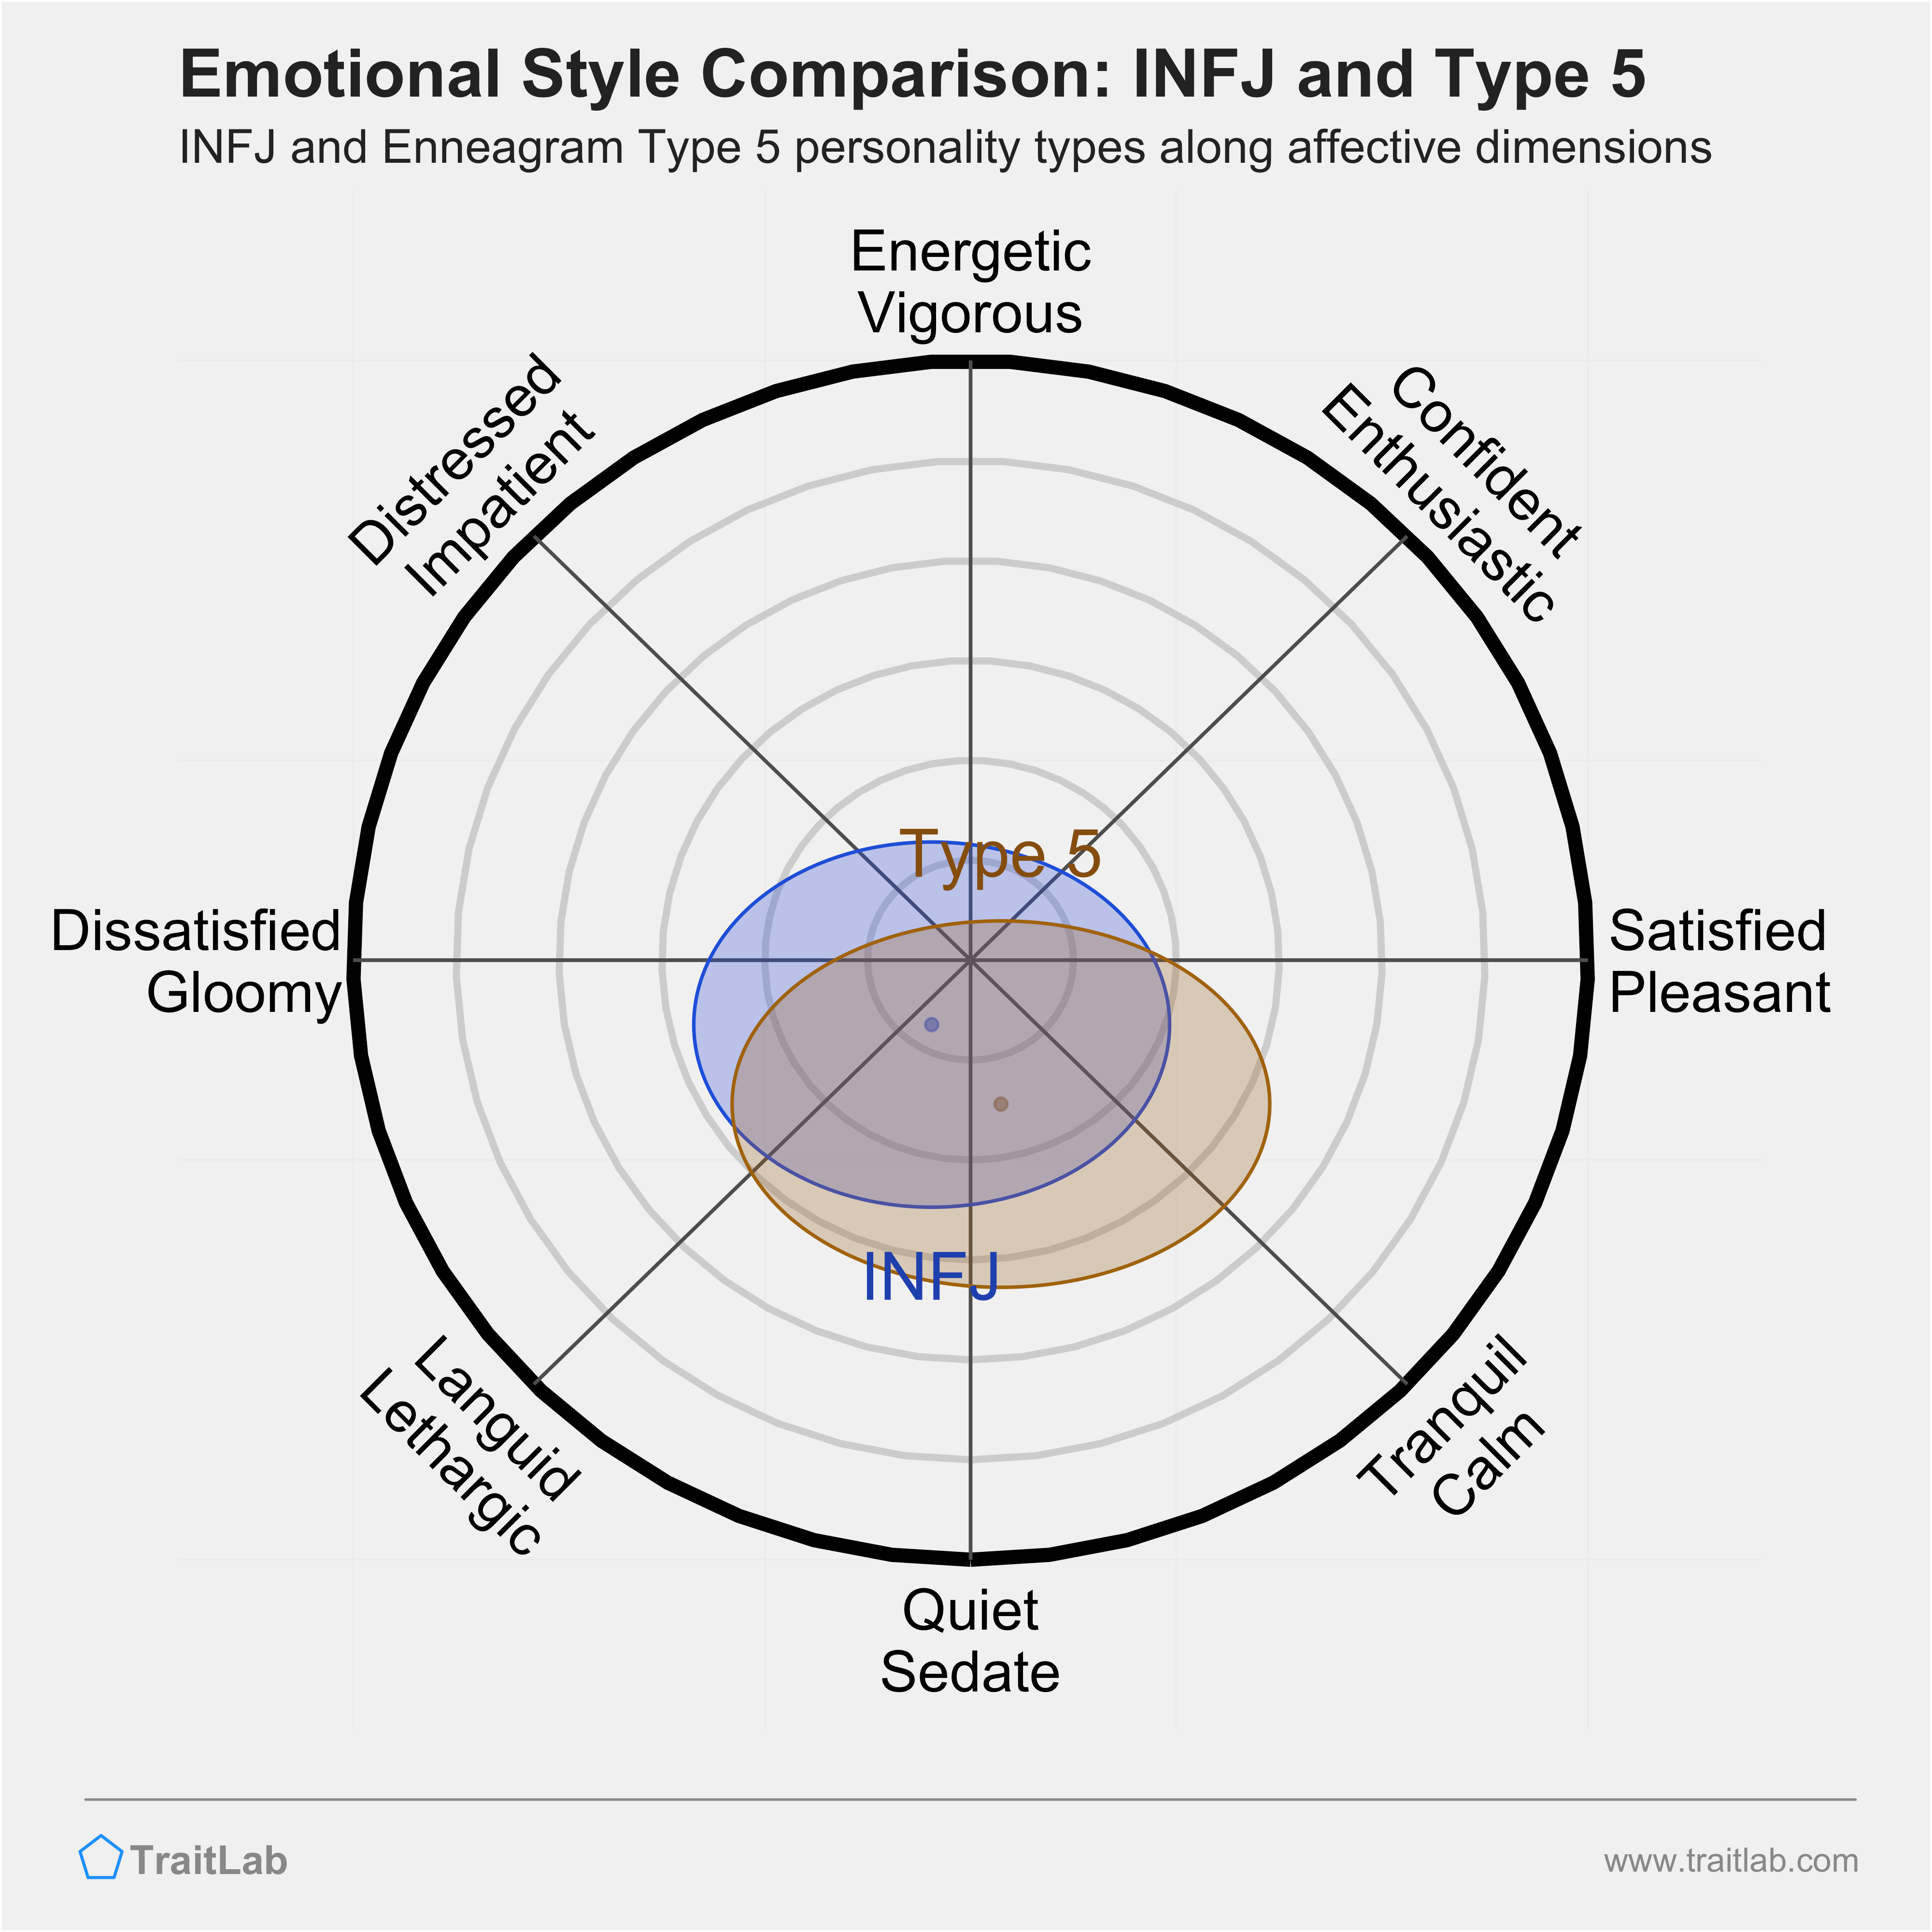 INFJ and Type 5 comparison across emotional (affective) dimensions